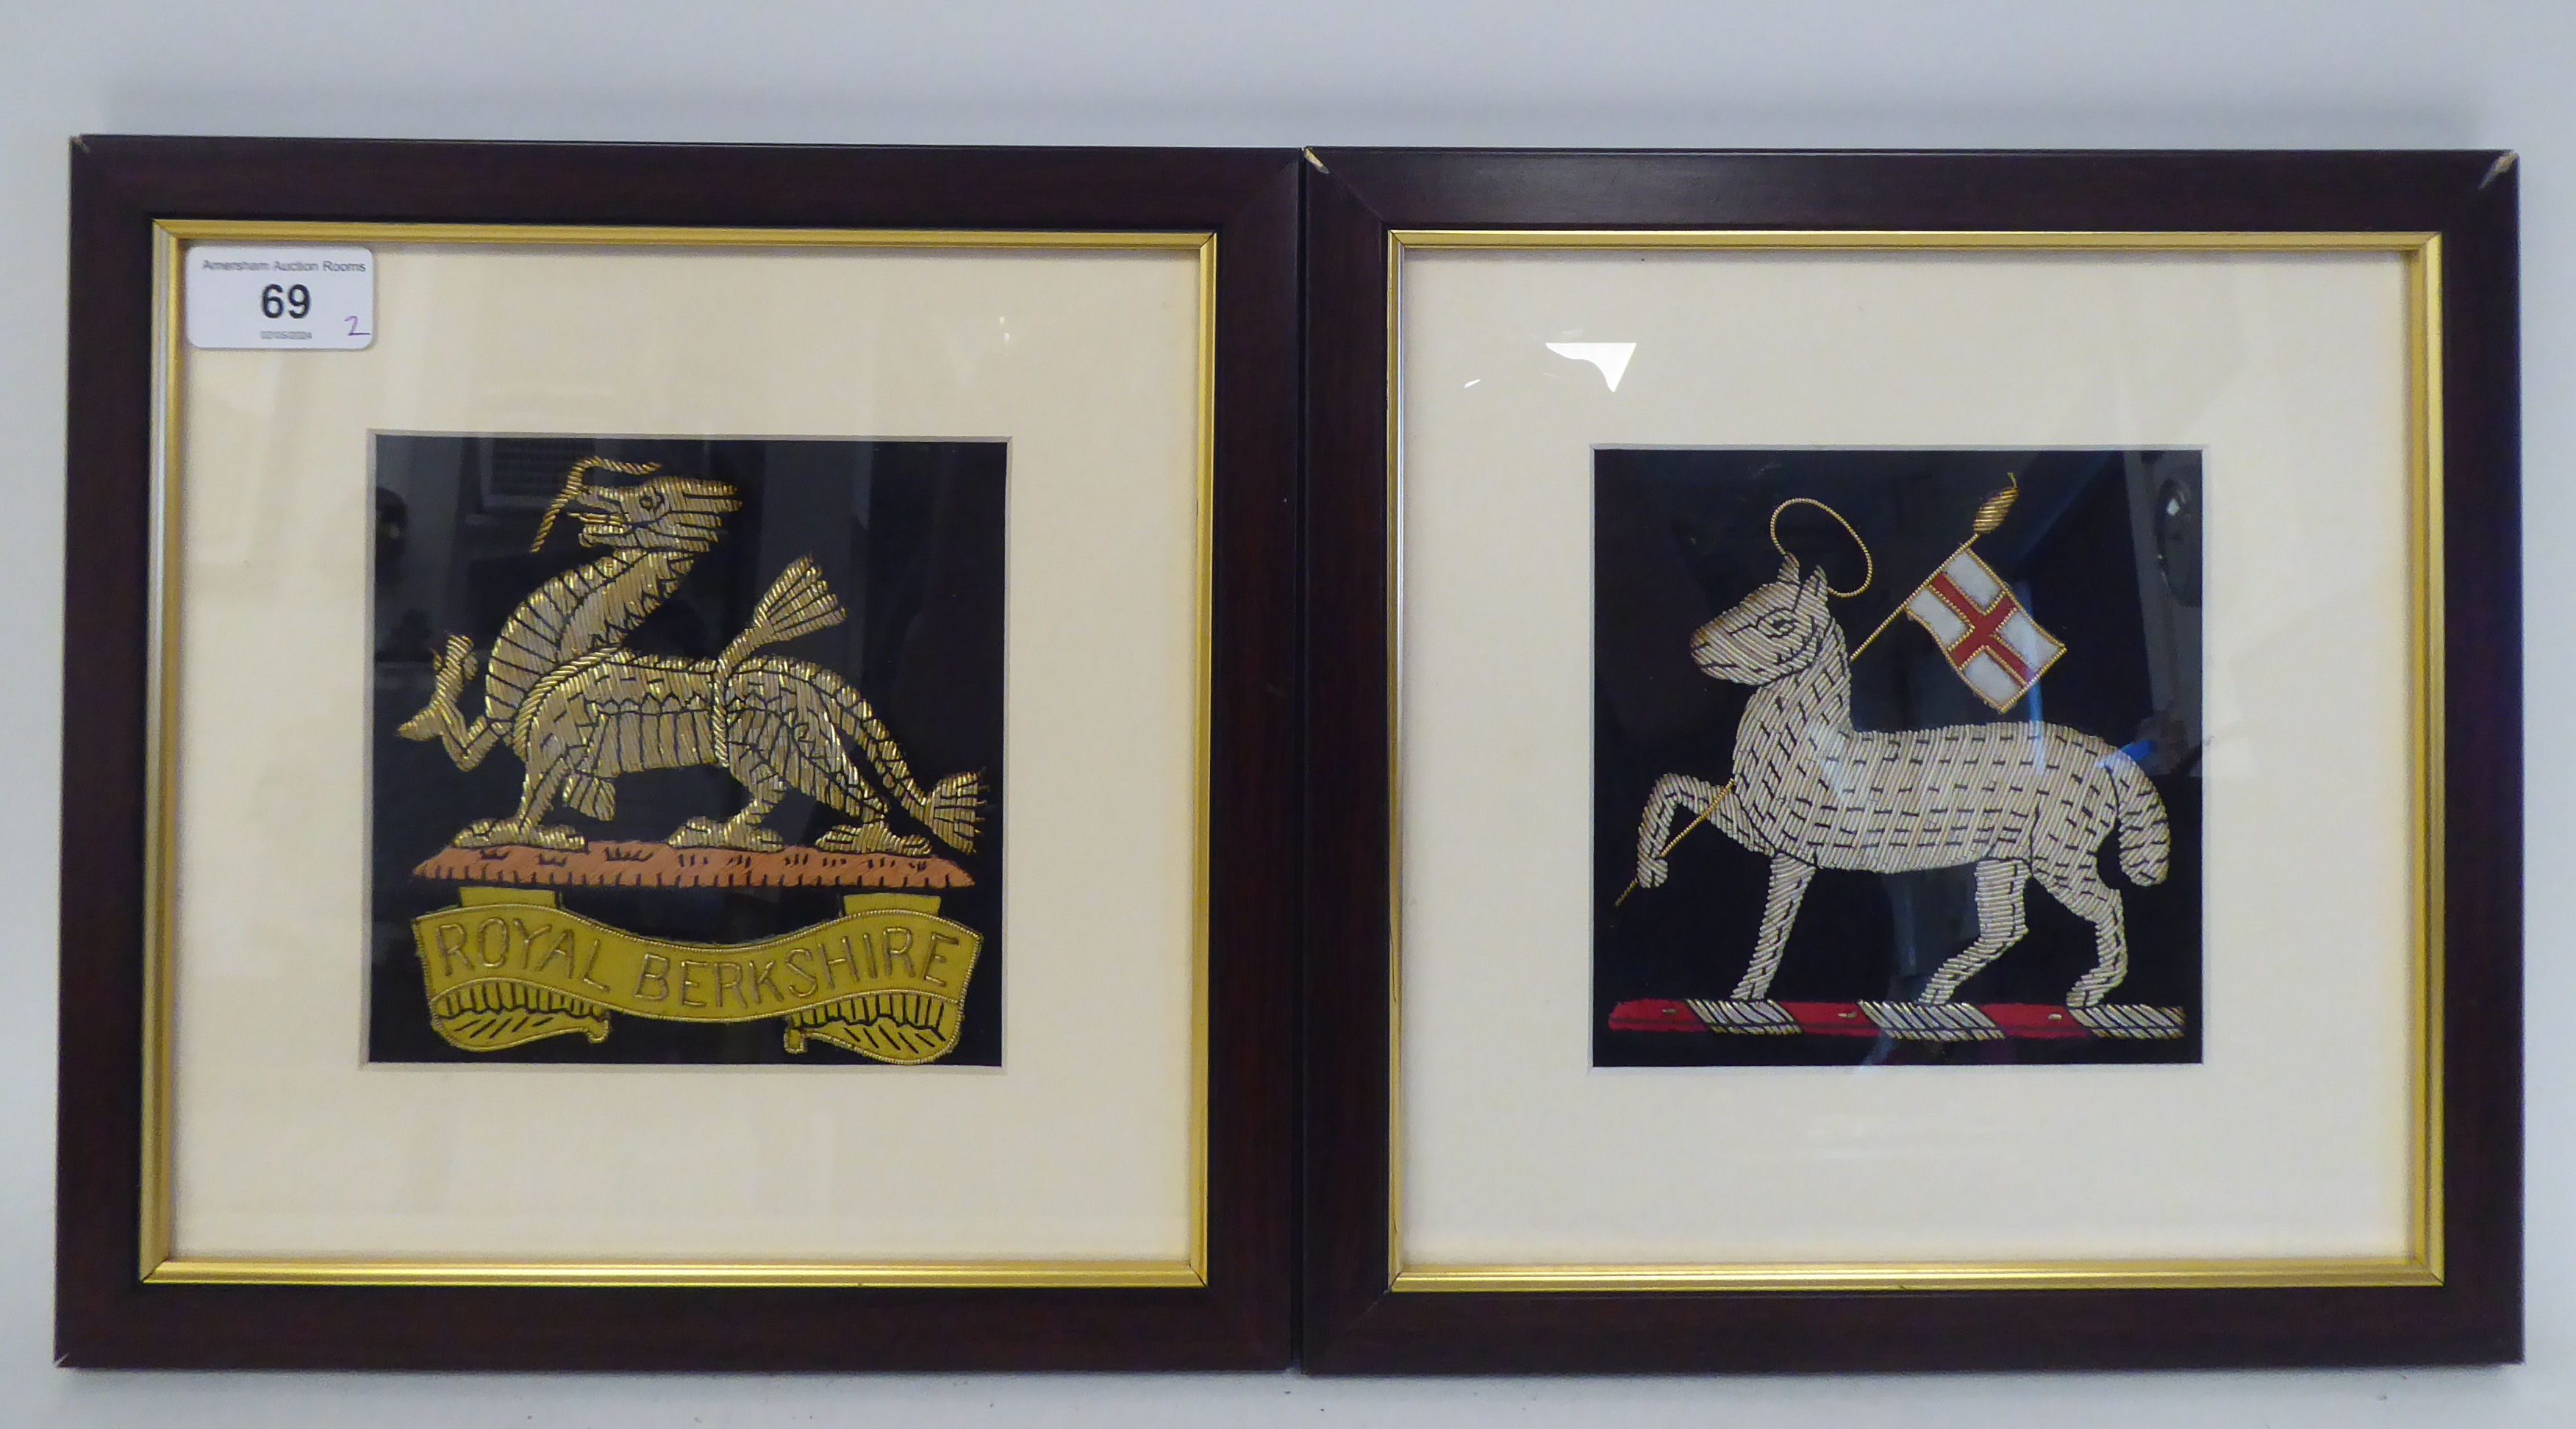 A Queen's Regiment and a Royal Berkshire Regiment embroidered, gold and silver coloured metal wire